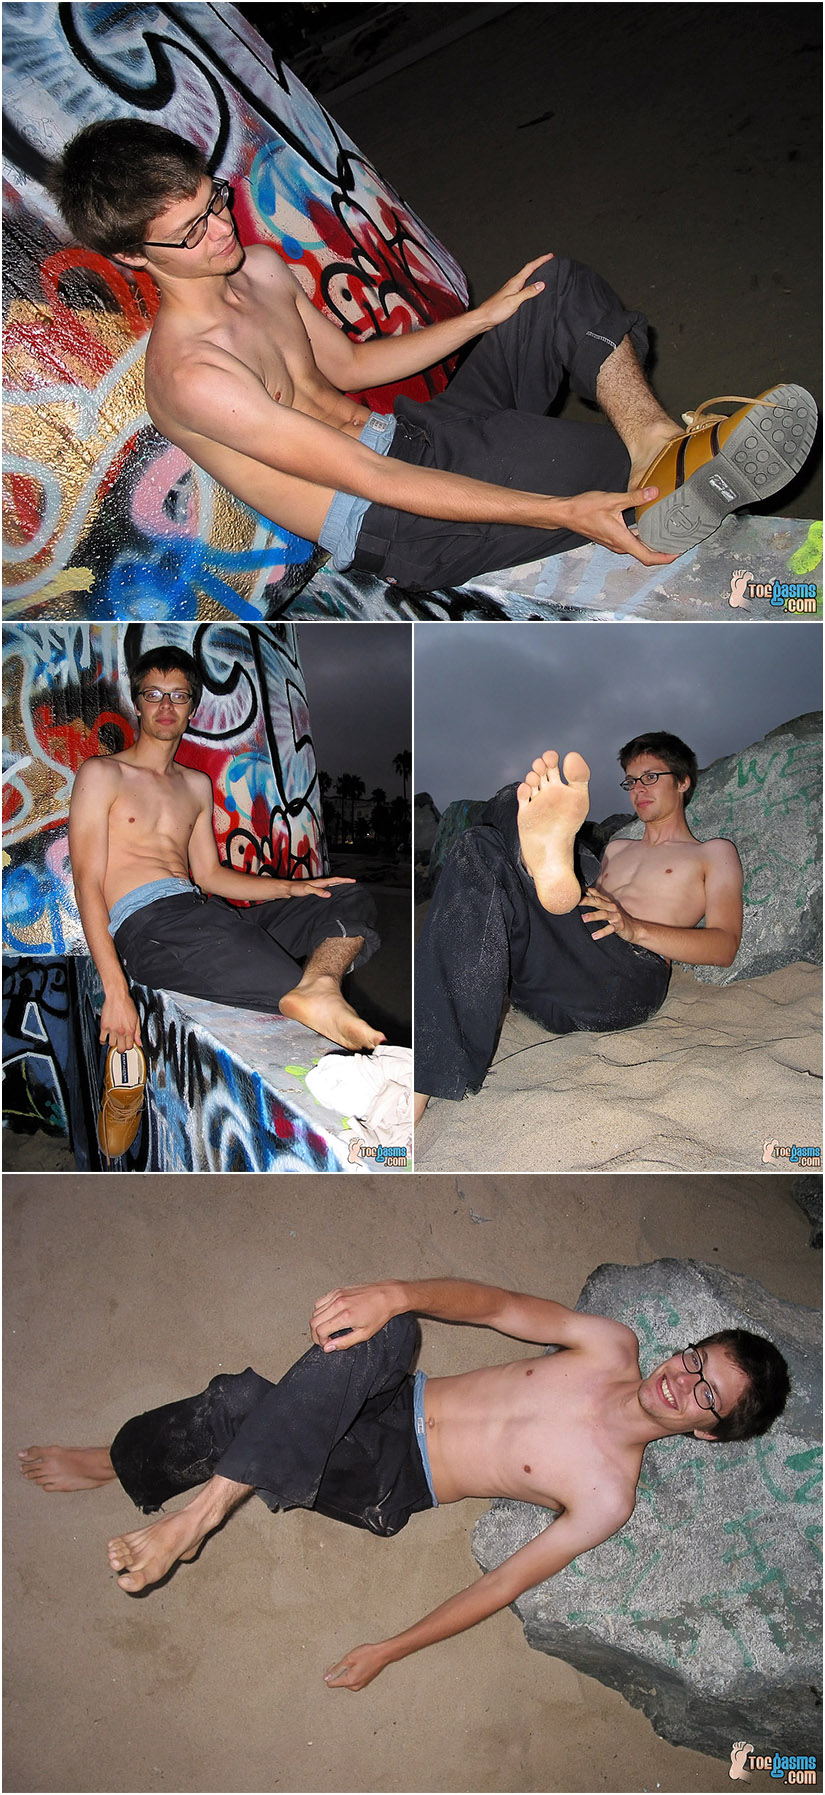 Barefoot, shirtless twink in glasses